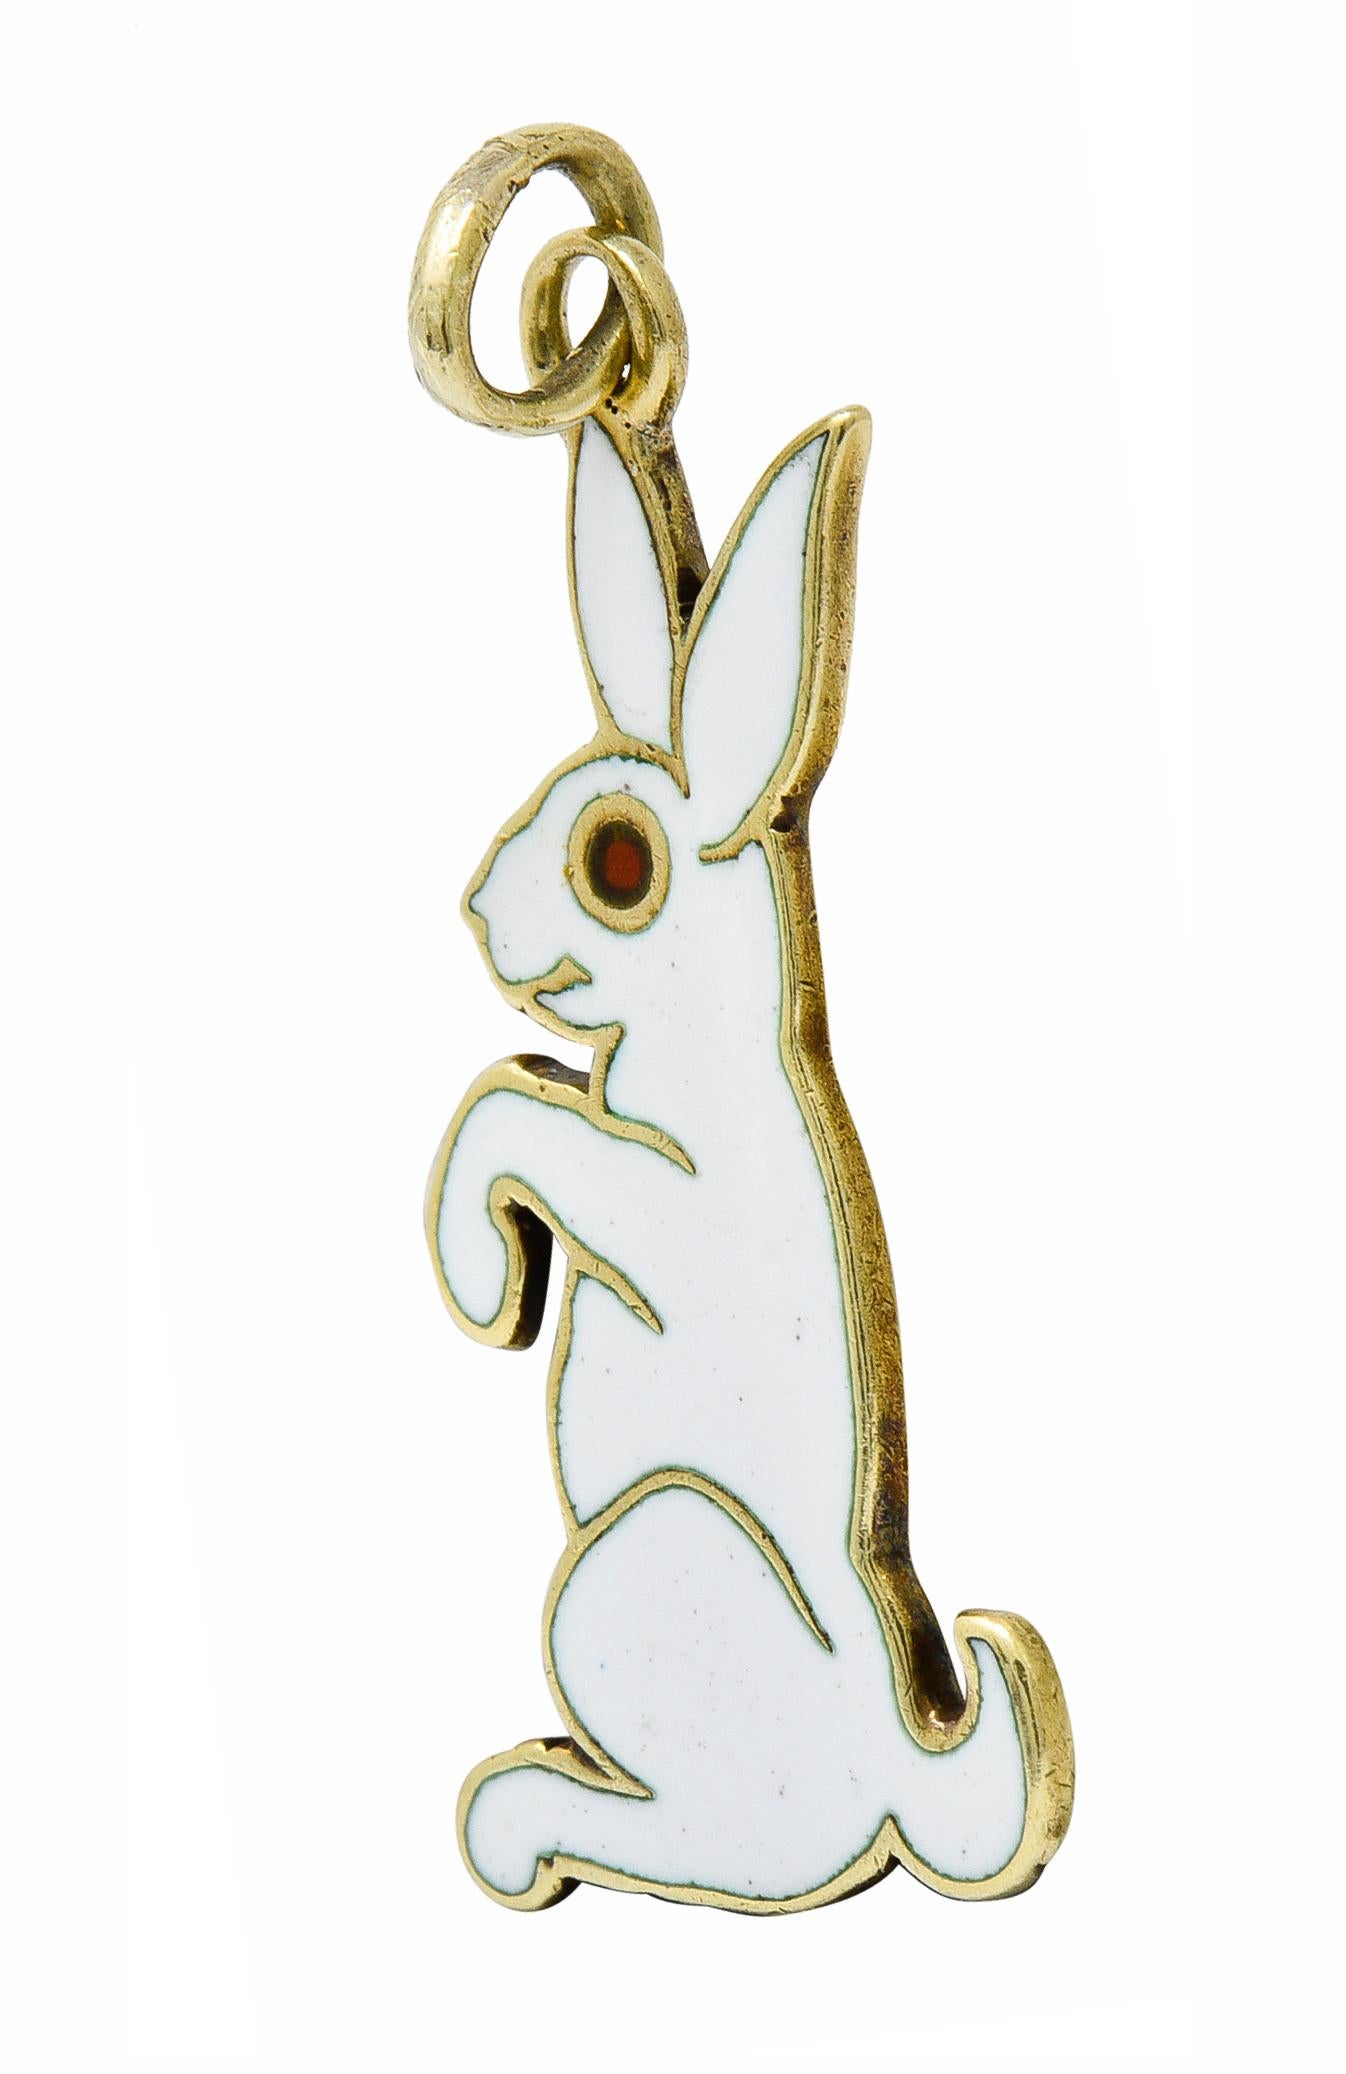 Charm is designed as a little white rabbit with a red eye

Glossed with enamel showing minimal loss

Tested as 14 karat gold

Numbered and signed Cartier NY

Circa: 1930s

Measures: 7/16 x 1 inch

Total weight: 1.1 grams

Eager. Magical. Pet.

